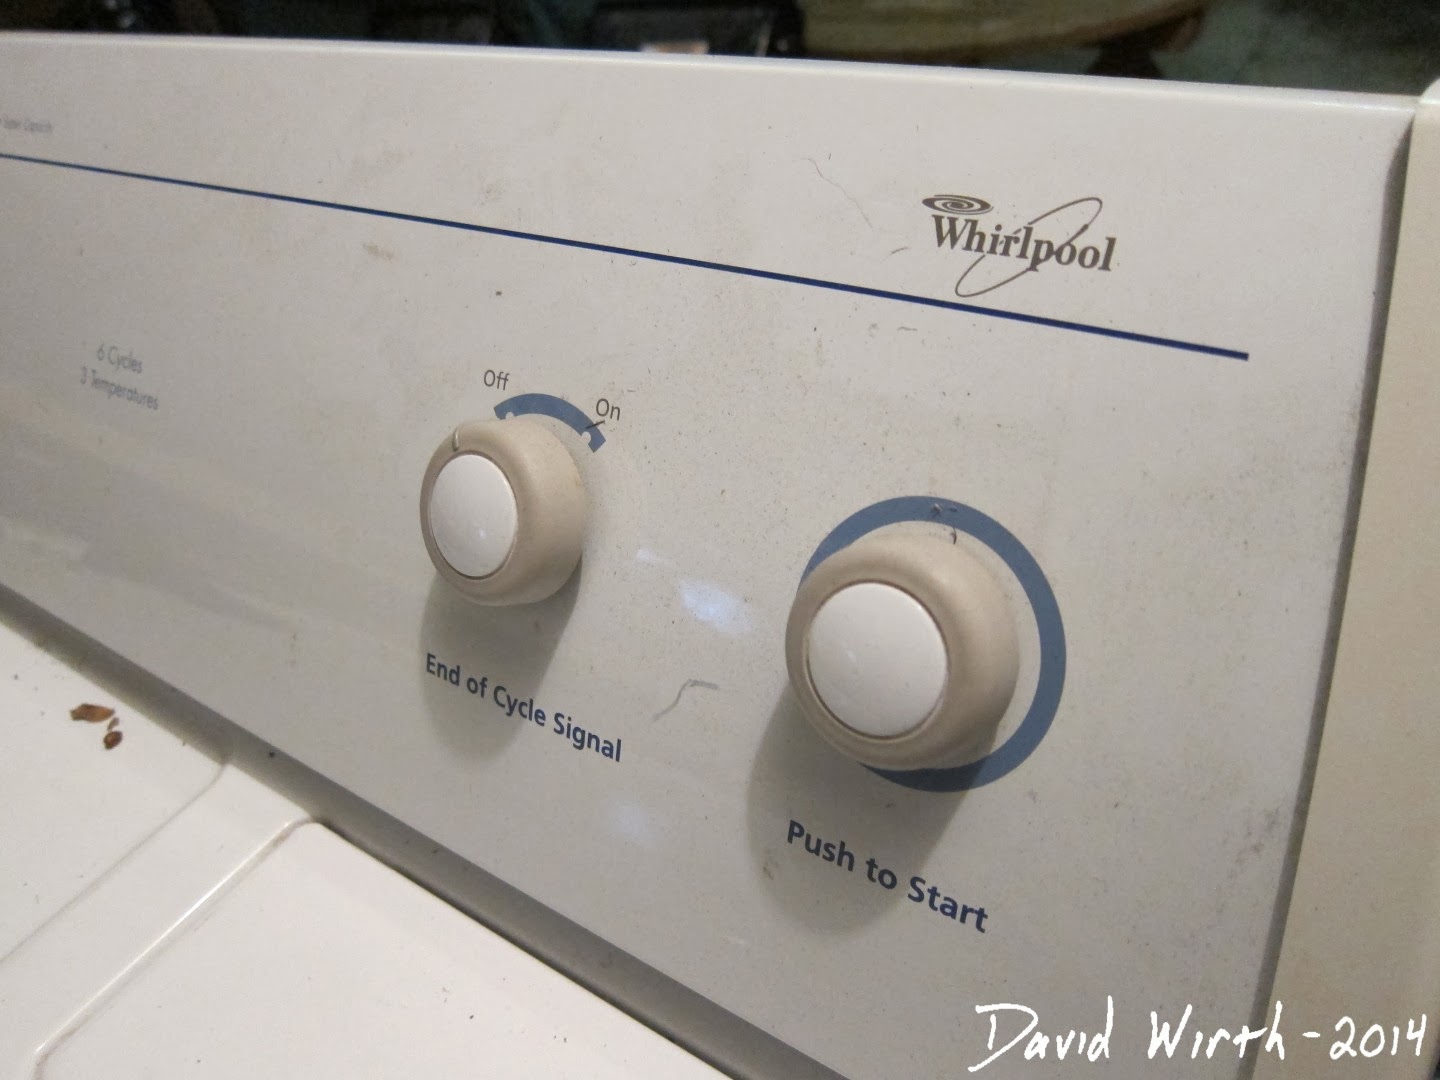 How do you fix a Whirlpool dryer that is not blowing hot air?